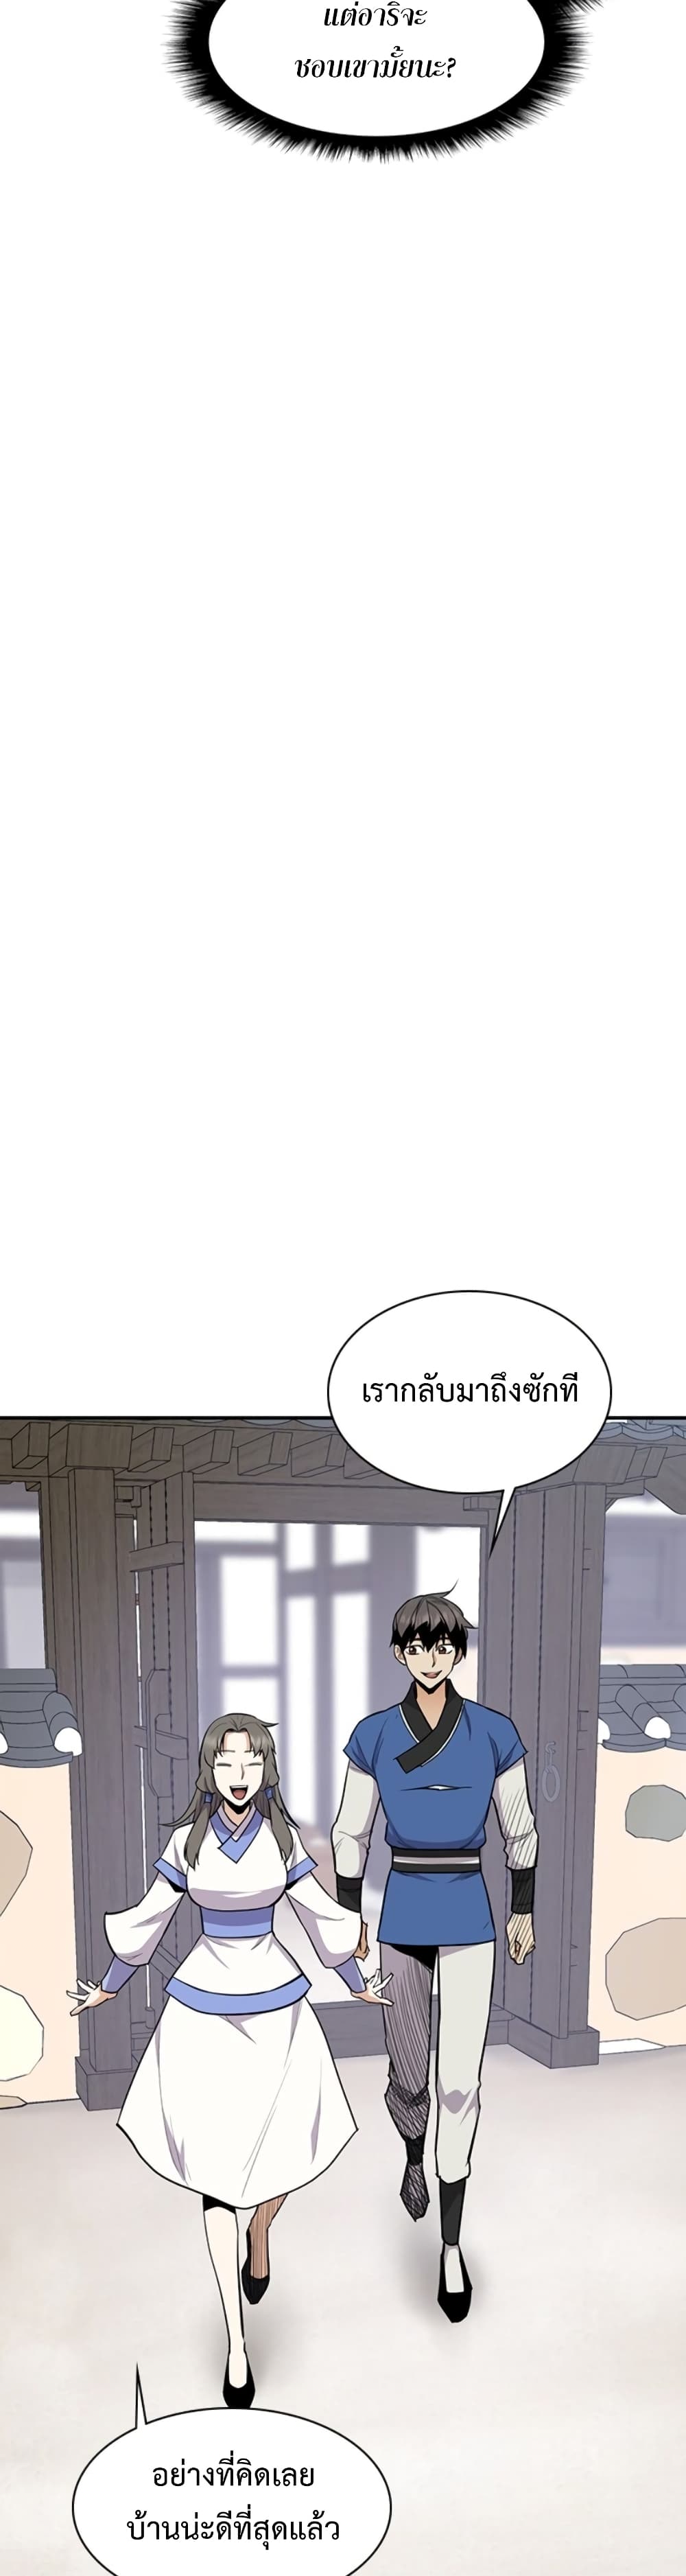 The Strongest Ever à¸à¸­à¸à¸à¸µà¹ 33 (10)